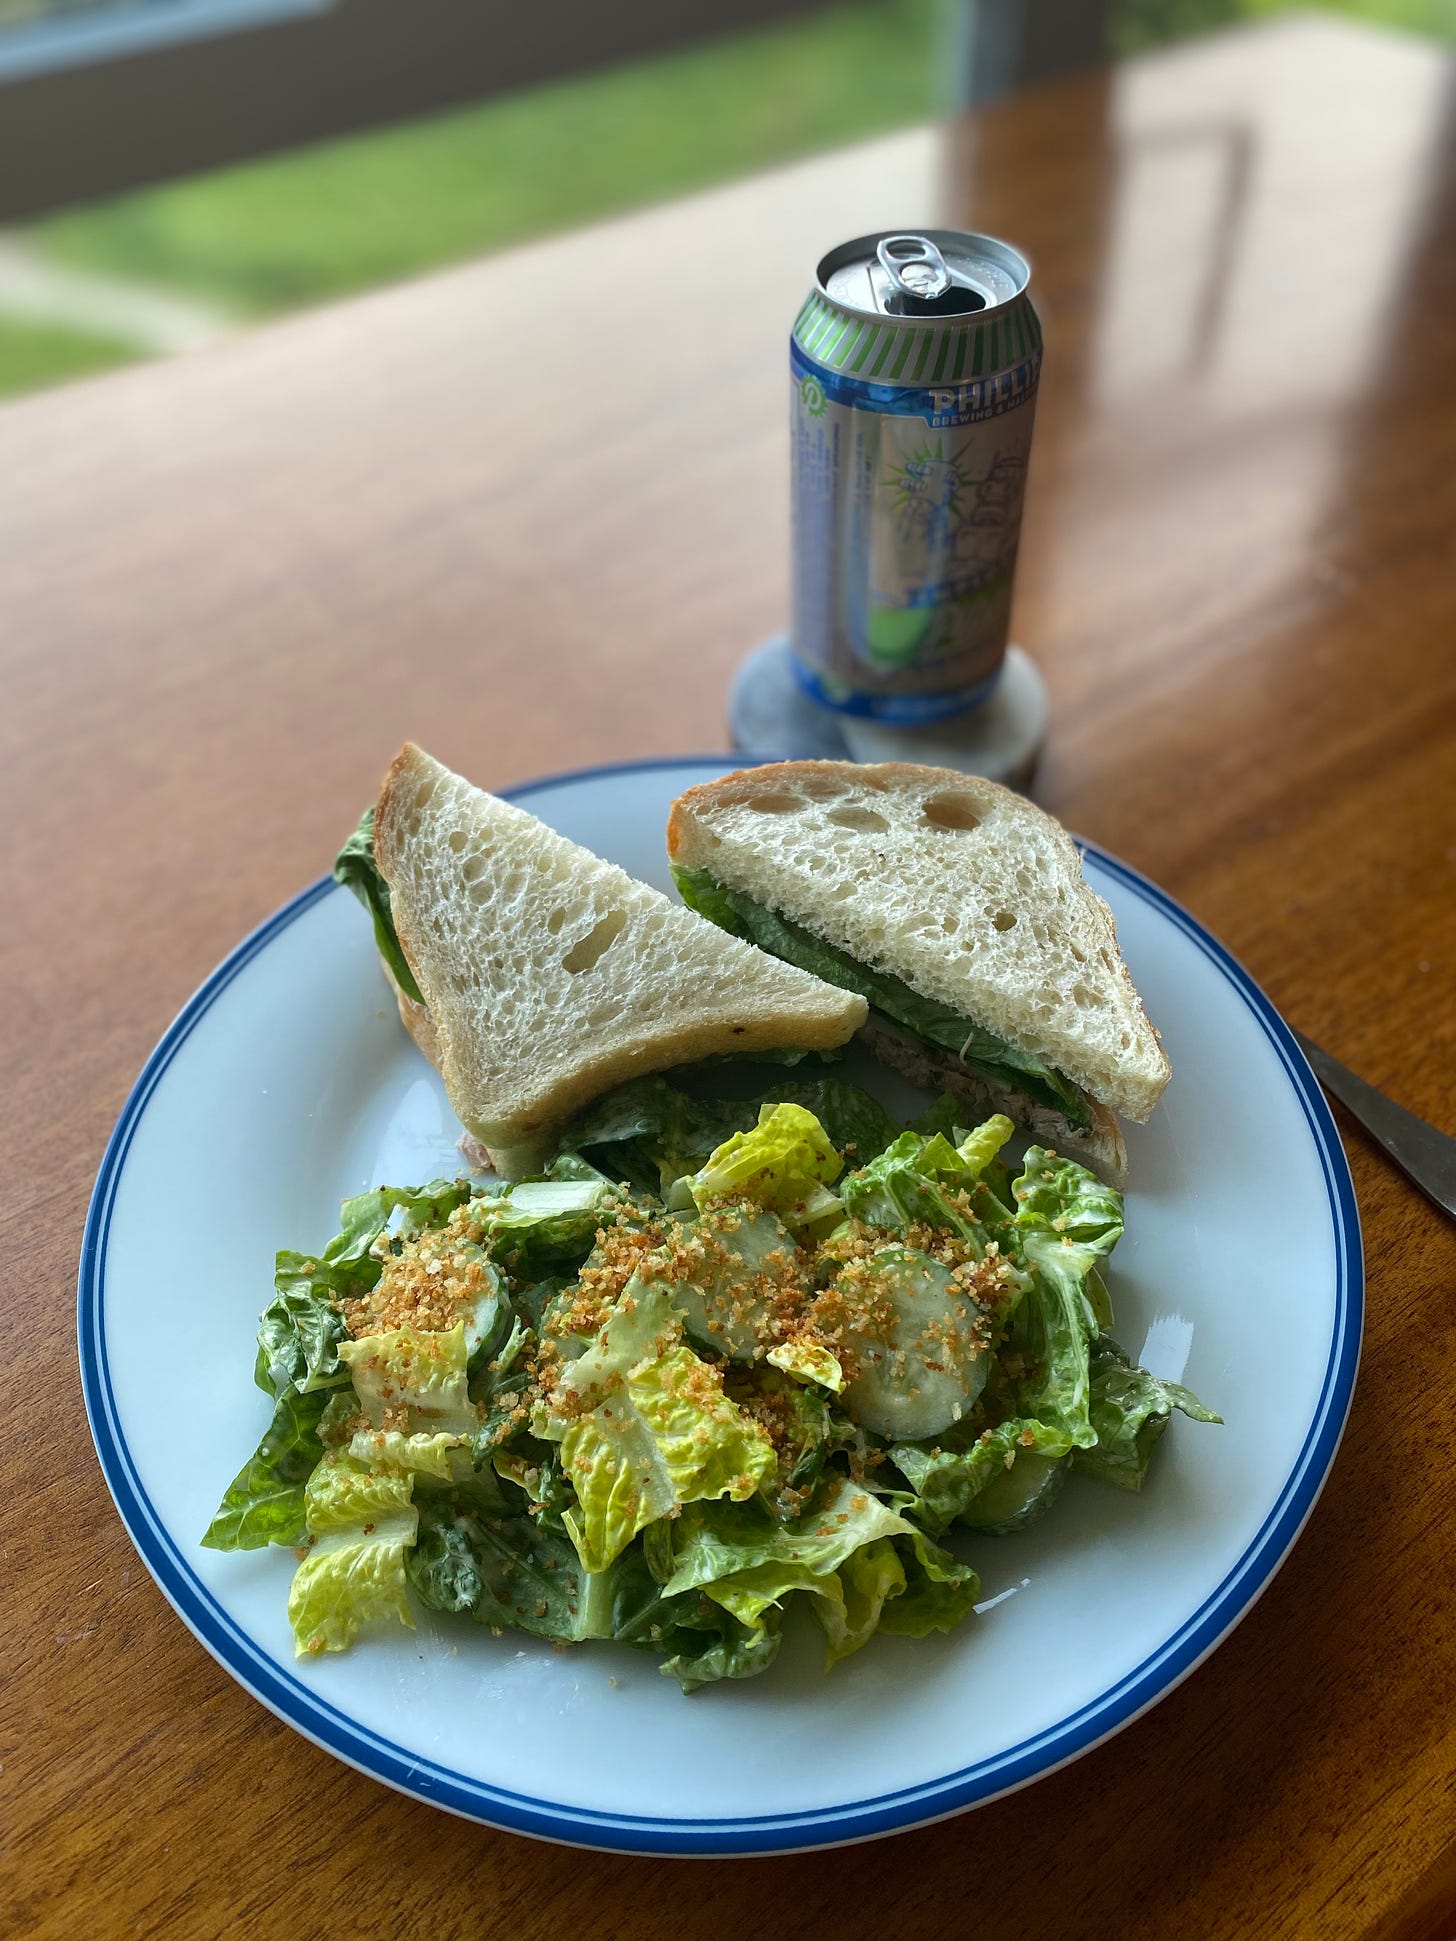 A white plate with a blue rim, filled mostly with a caesar salad of chopped romaine, cucumber, and toasted panko crumbs. At the back of the plate are two offset halves of a tuna sandwich on sourdough. In the background, a can of Phillips pilsner sits on a coaster.